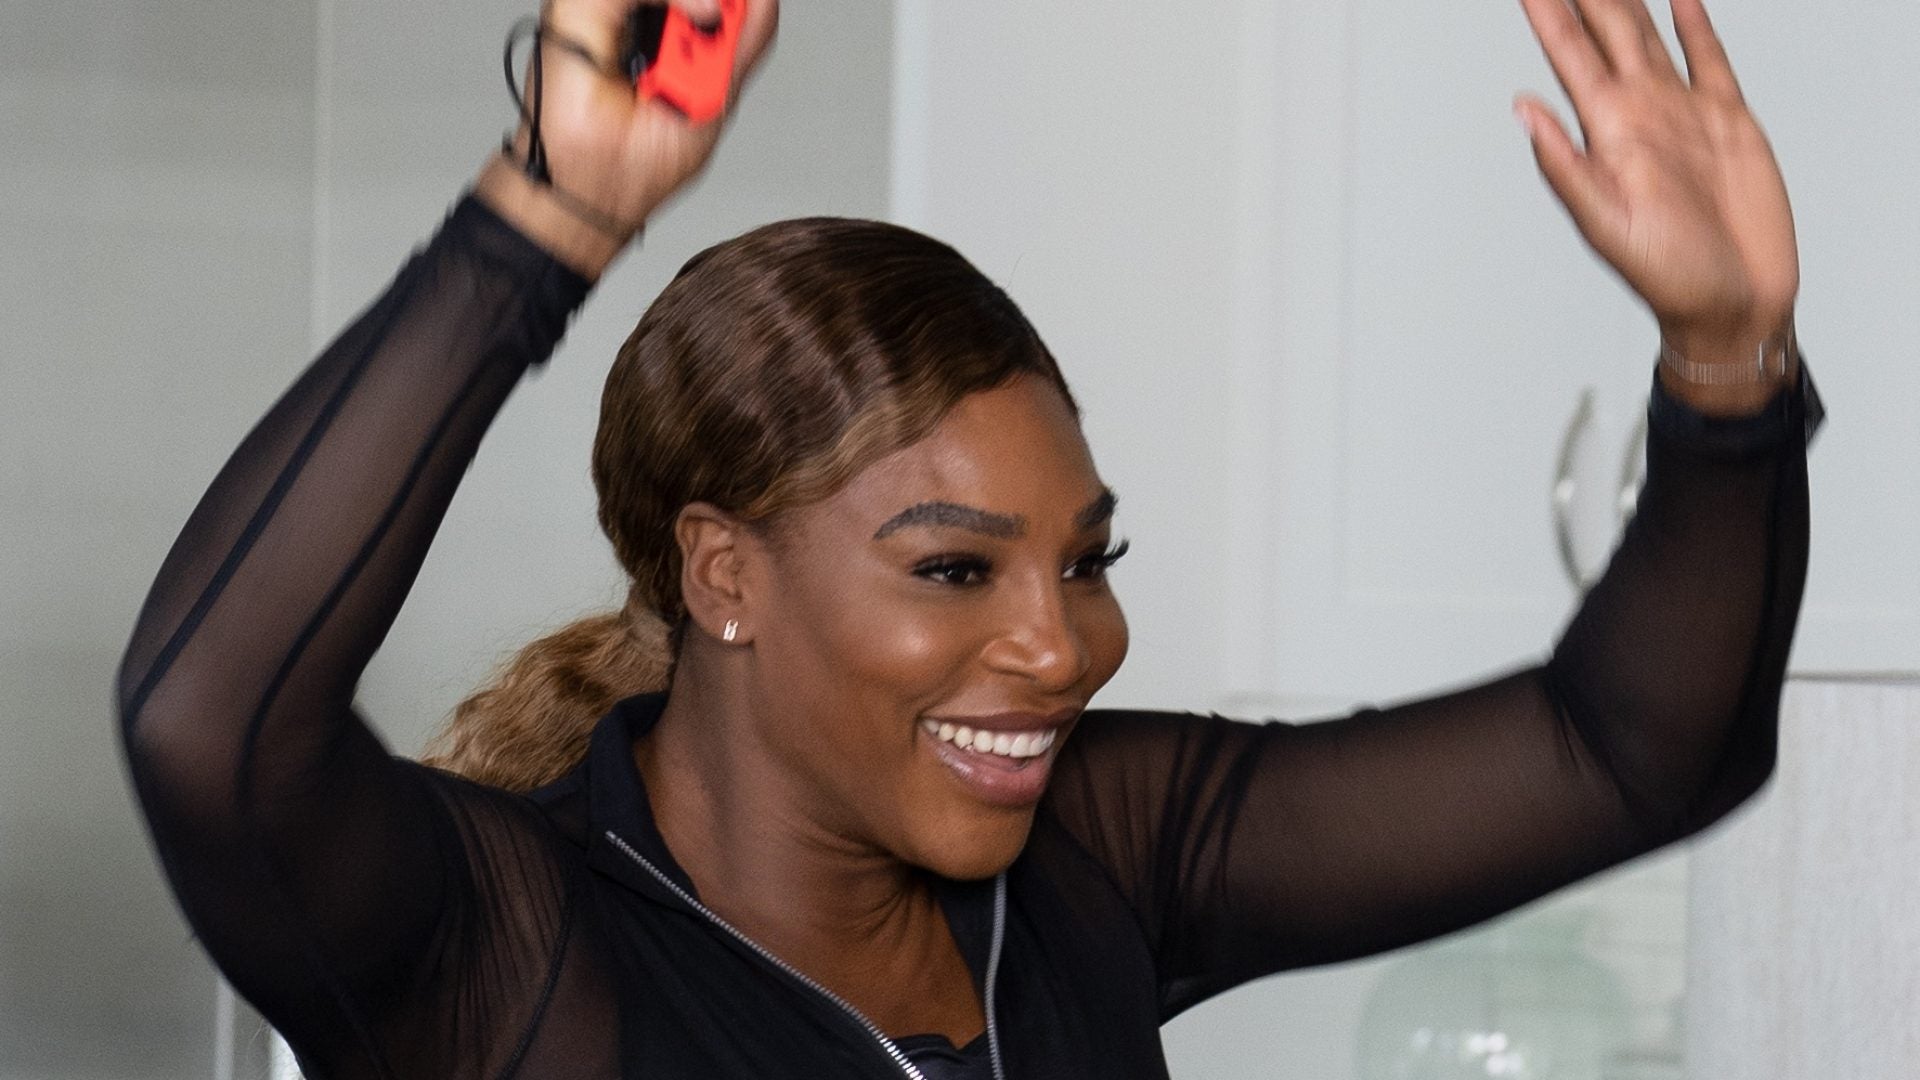 Serena Williams Shares Her Love For Gaming From Childhood To Now